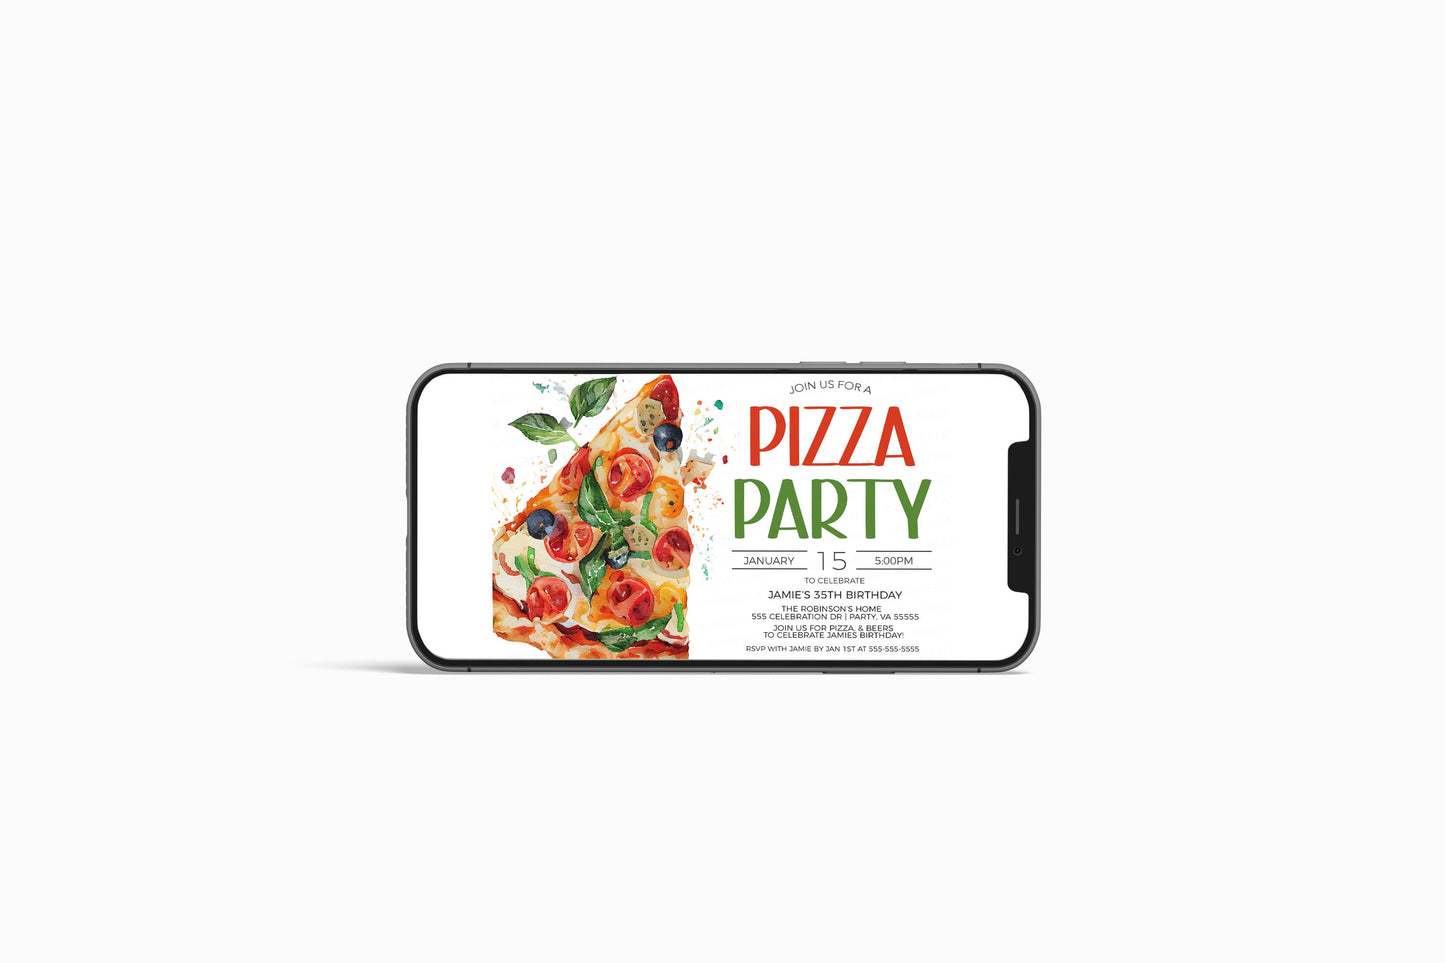 Pizza Party Invitation, Pizza Party Invite, Pizza Birthday Party, Client Customer Staff Employee Volunteer, Editable Printable Template